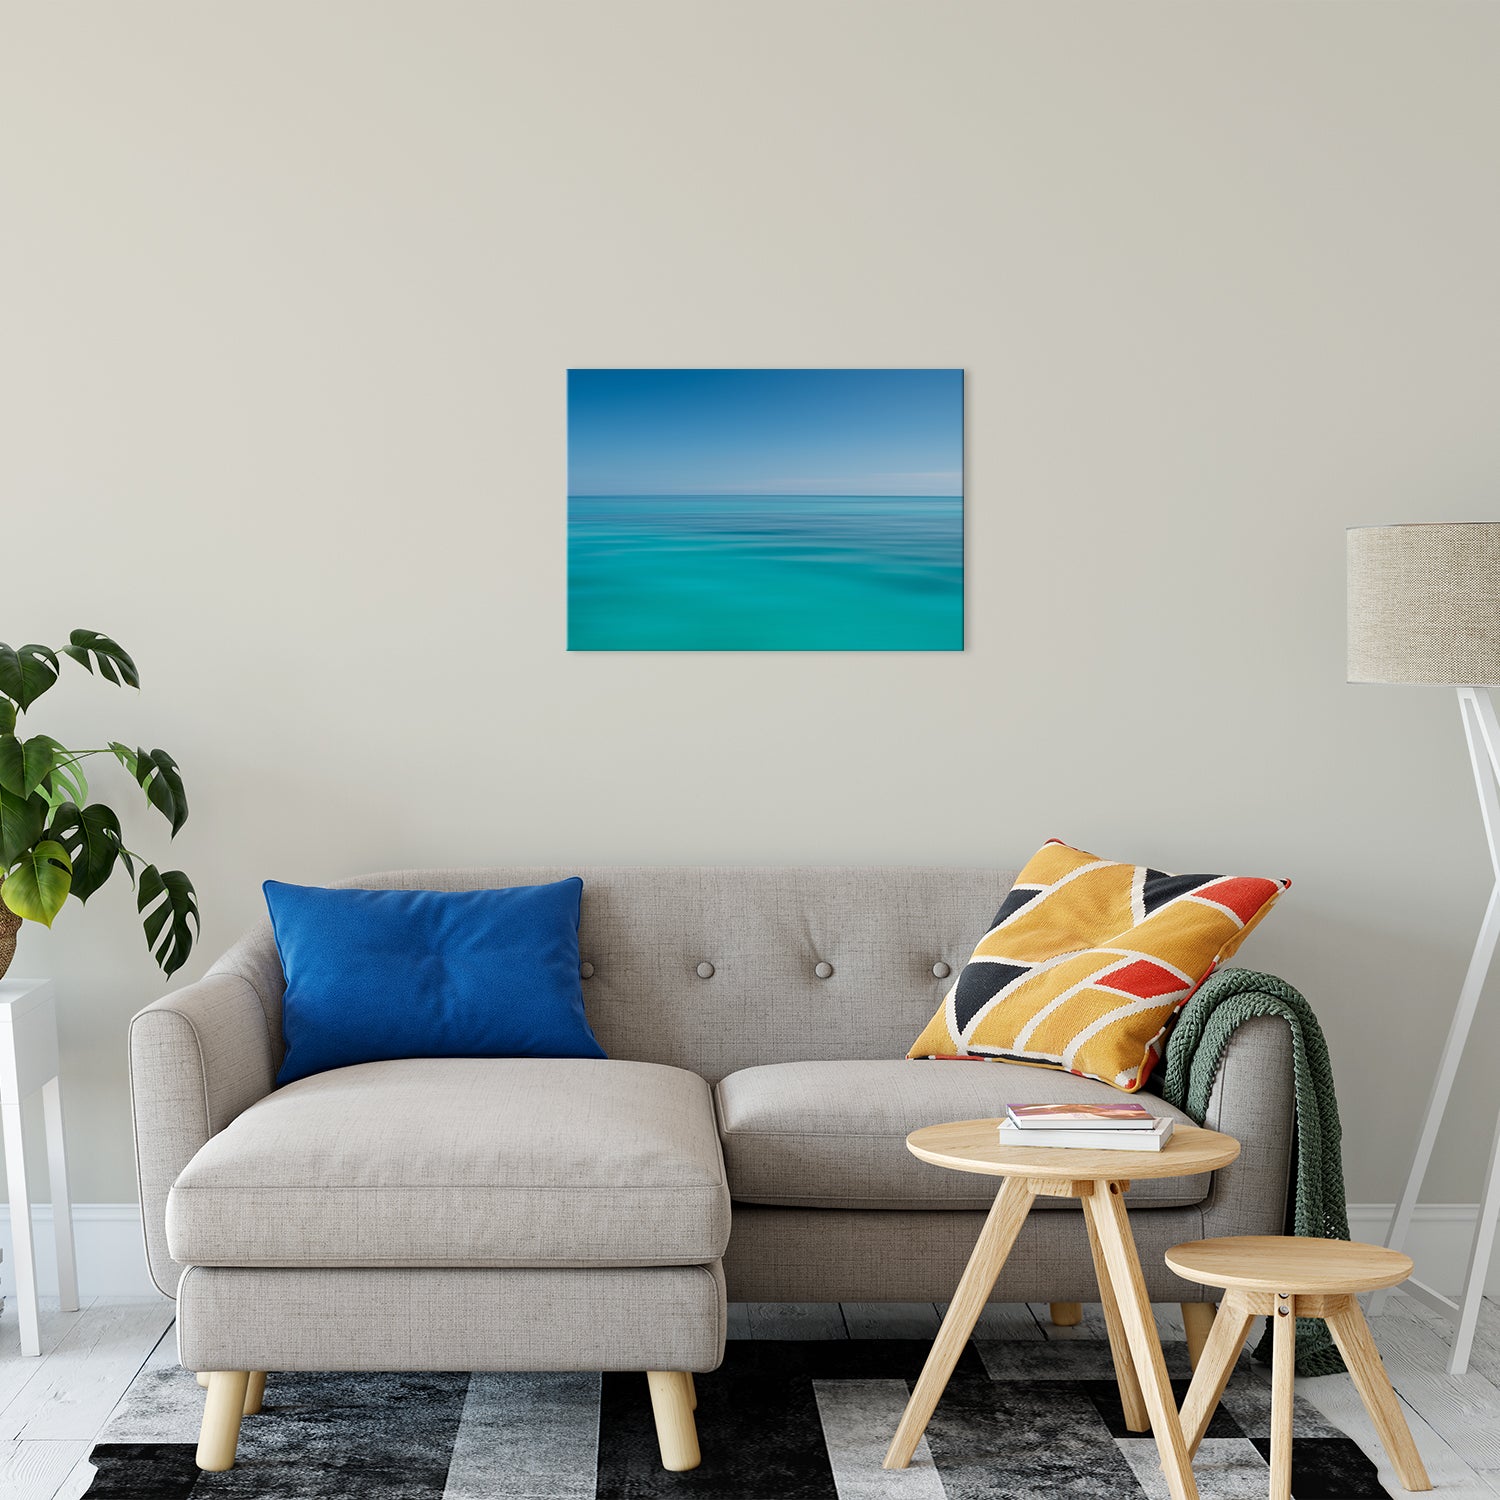 Colors of The Tropical Sea Abstract Coastal Landscape Fine Art Canvas Prints 20" x 30" - PIPAFINEART